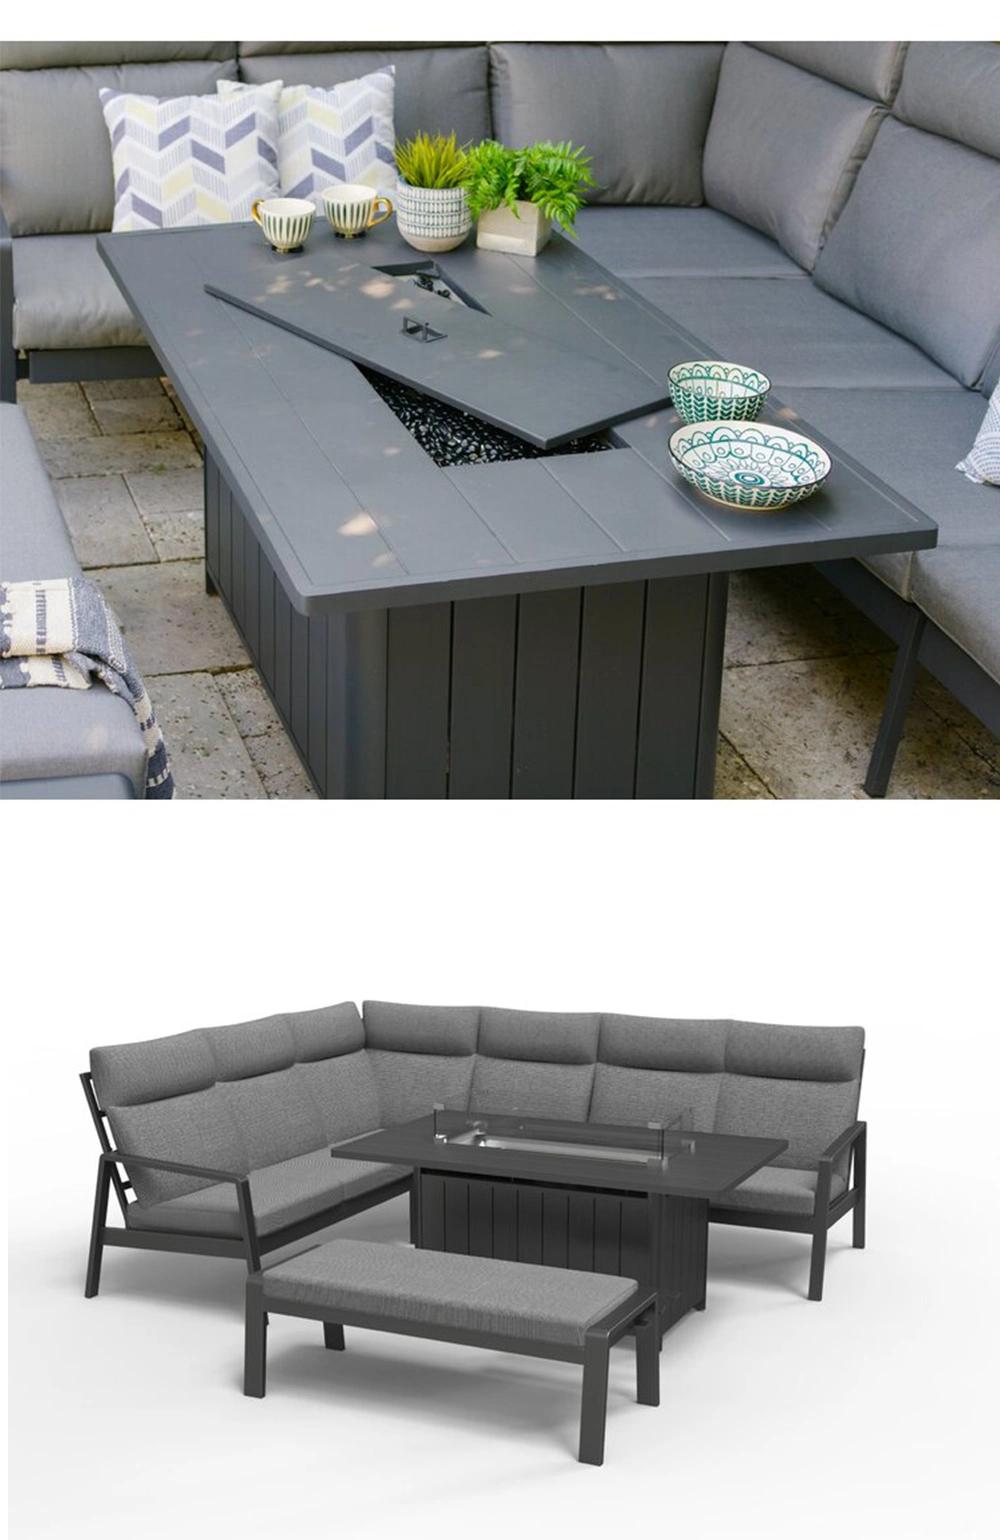 Best Price of Aluminum Dining Sofa Metal Grill Gas Fire Pit Table and Chair Set Outdoor Garden Furniture